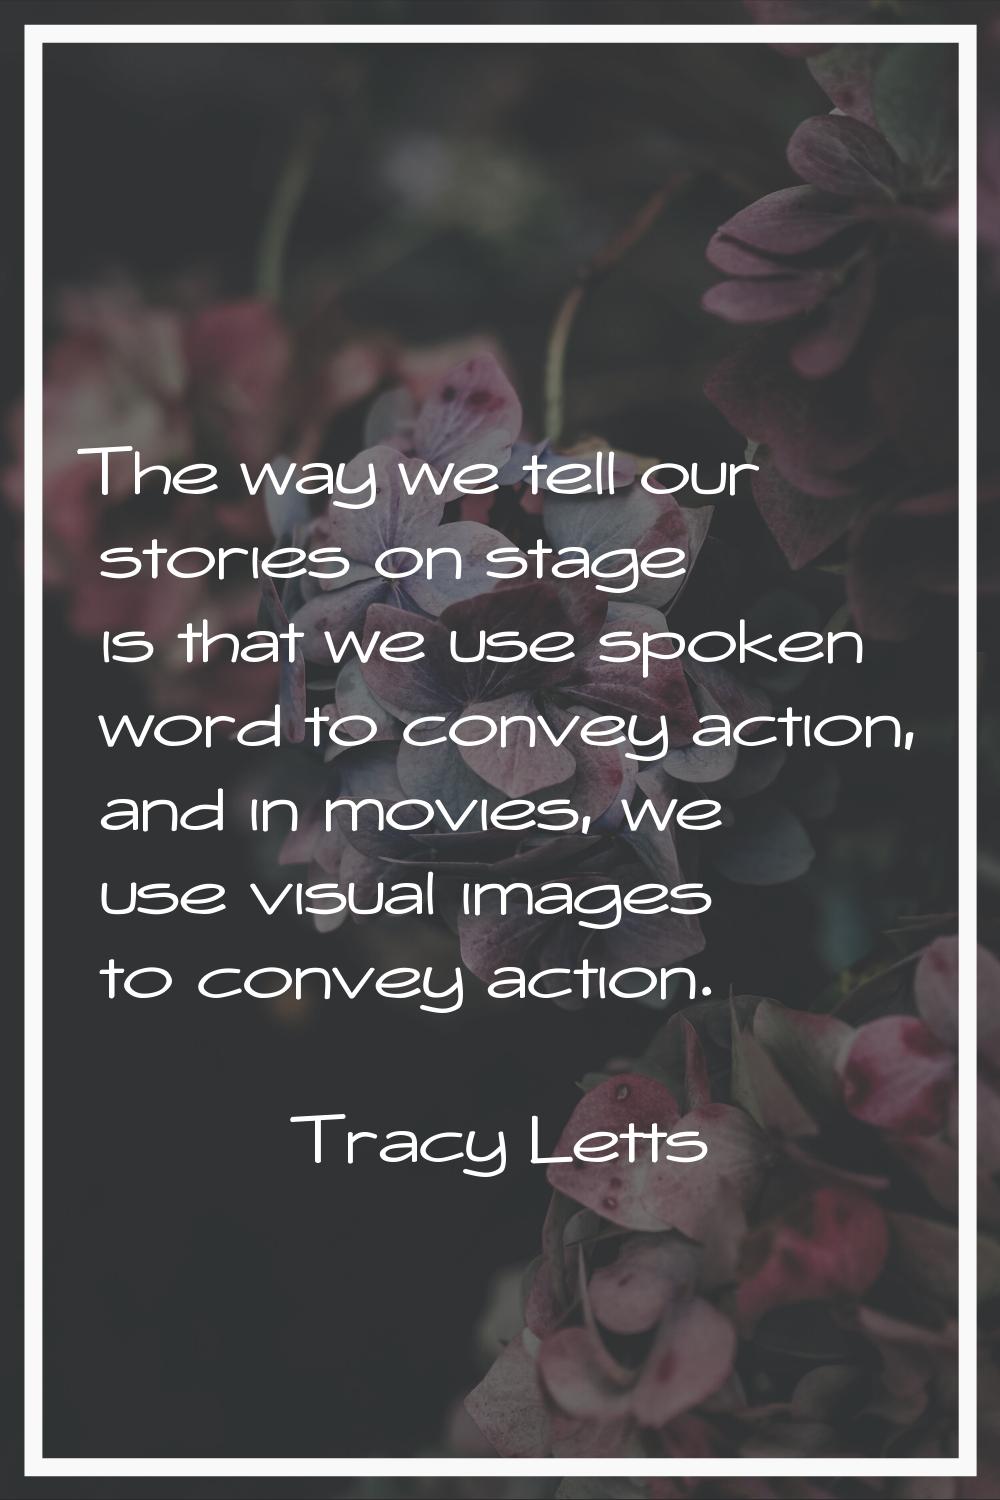 The way we tell our stories on stage is that we use spoken word to convey action, and in movies, we